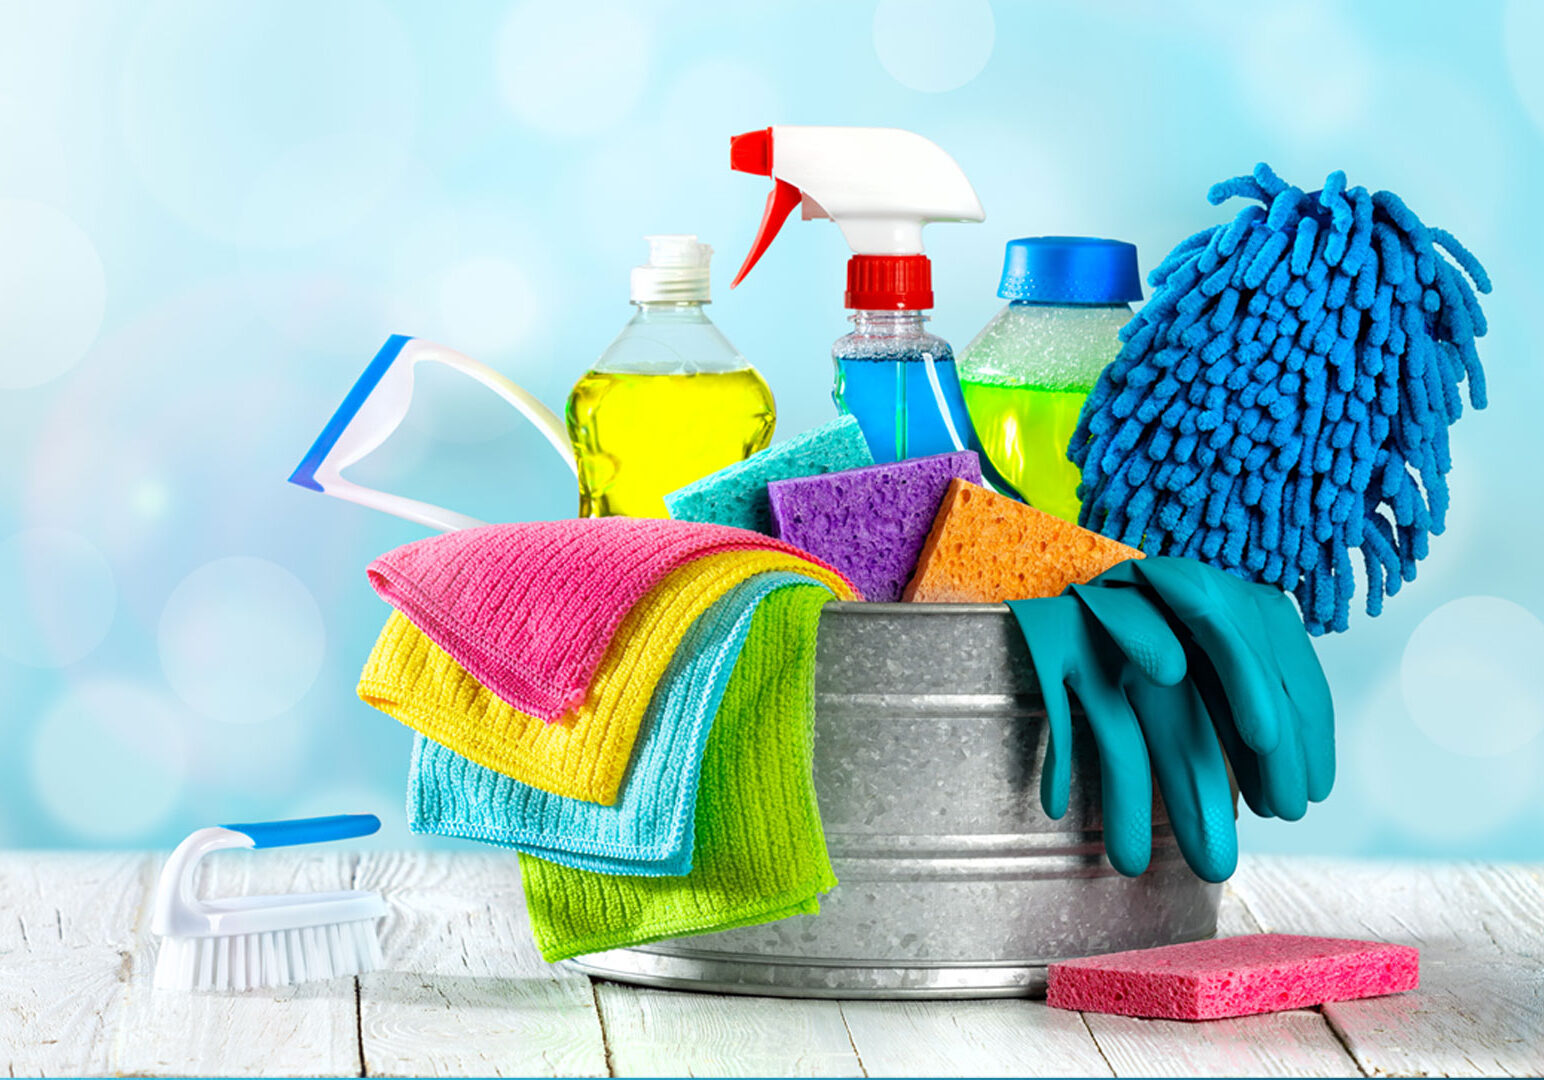 use of chemicals when cleaning